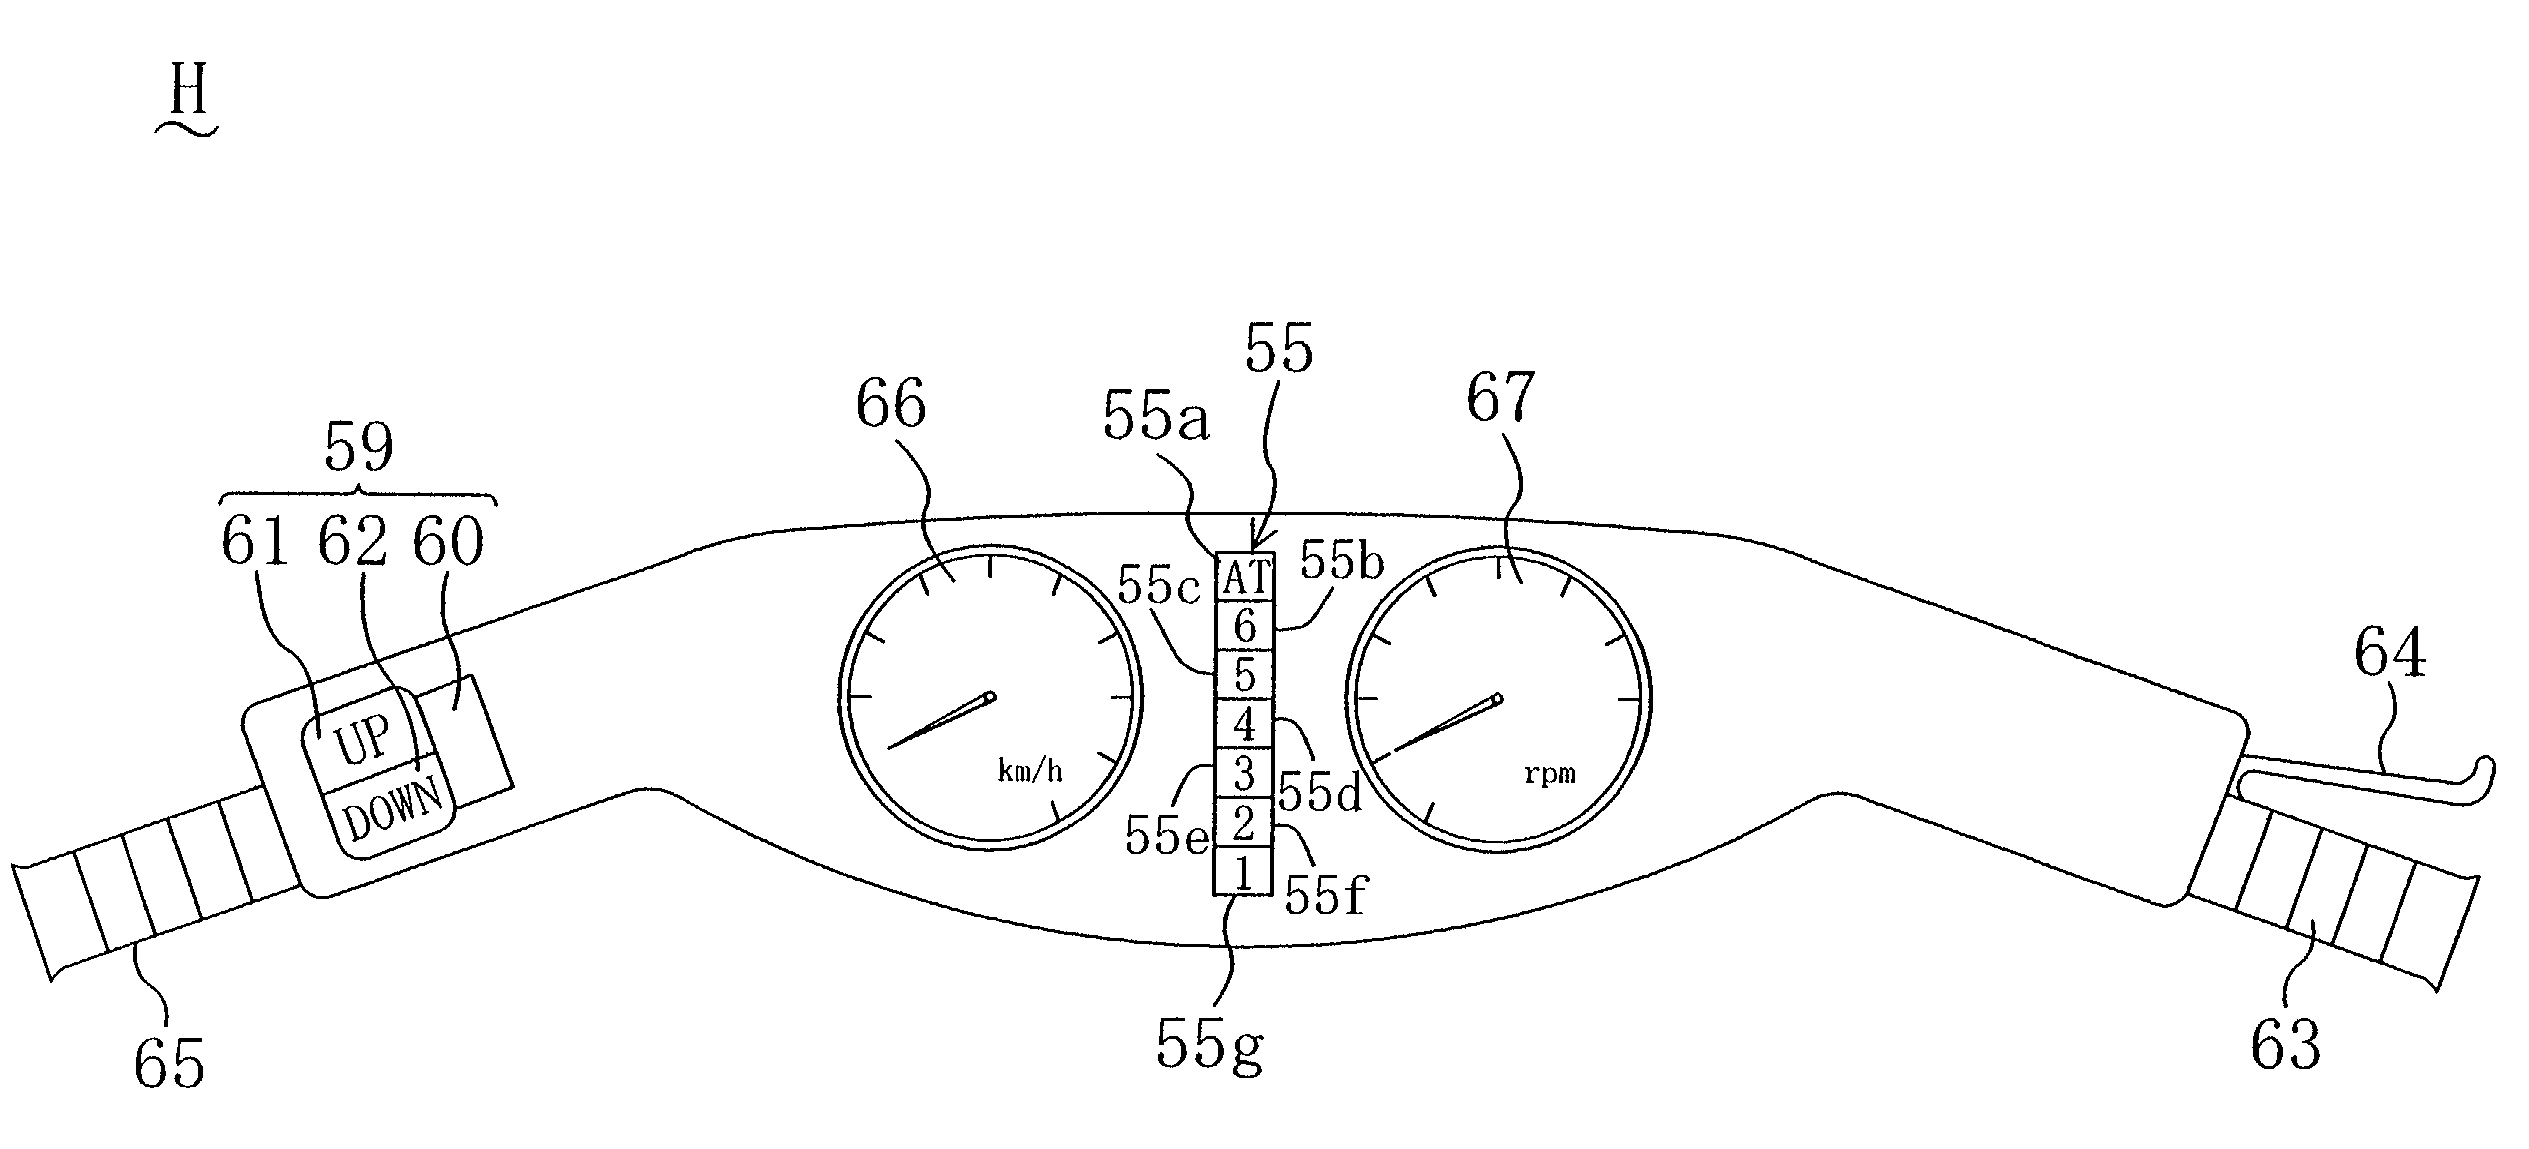 Variable speed control apparatus for automotive vehicles